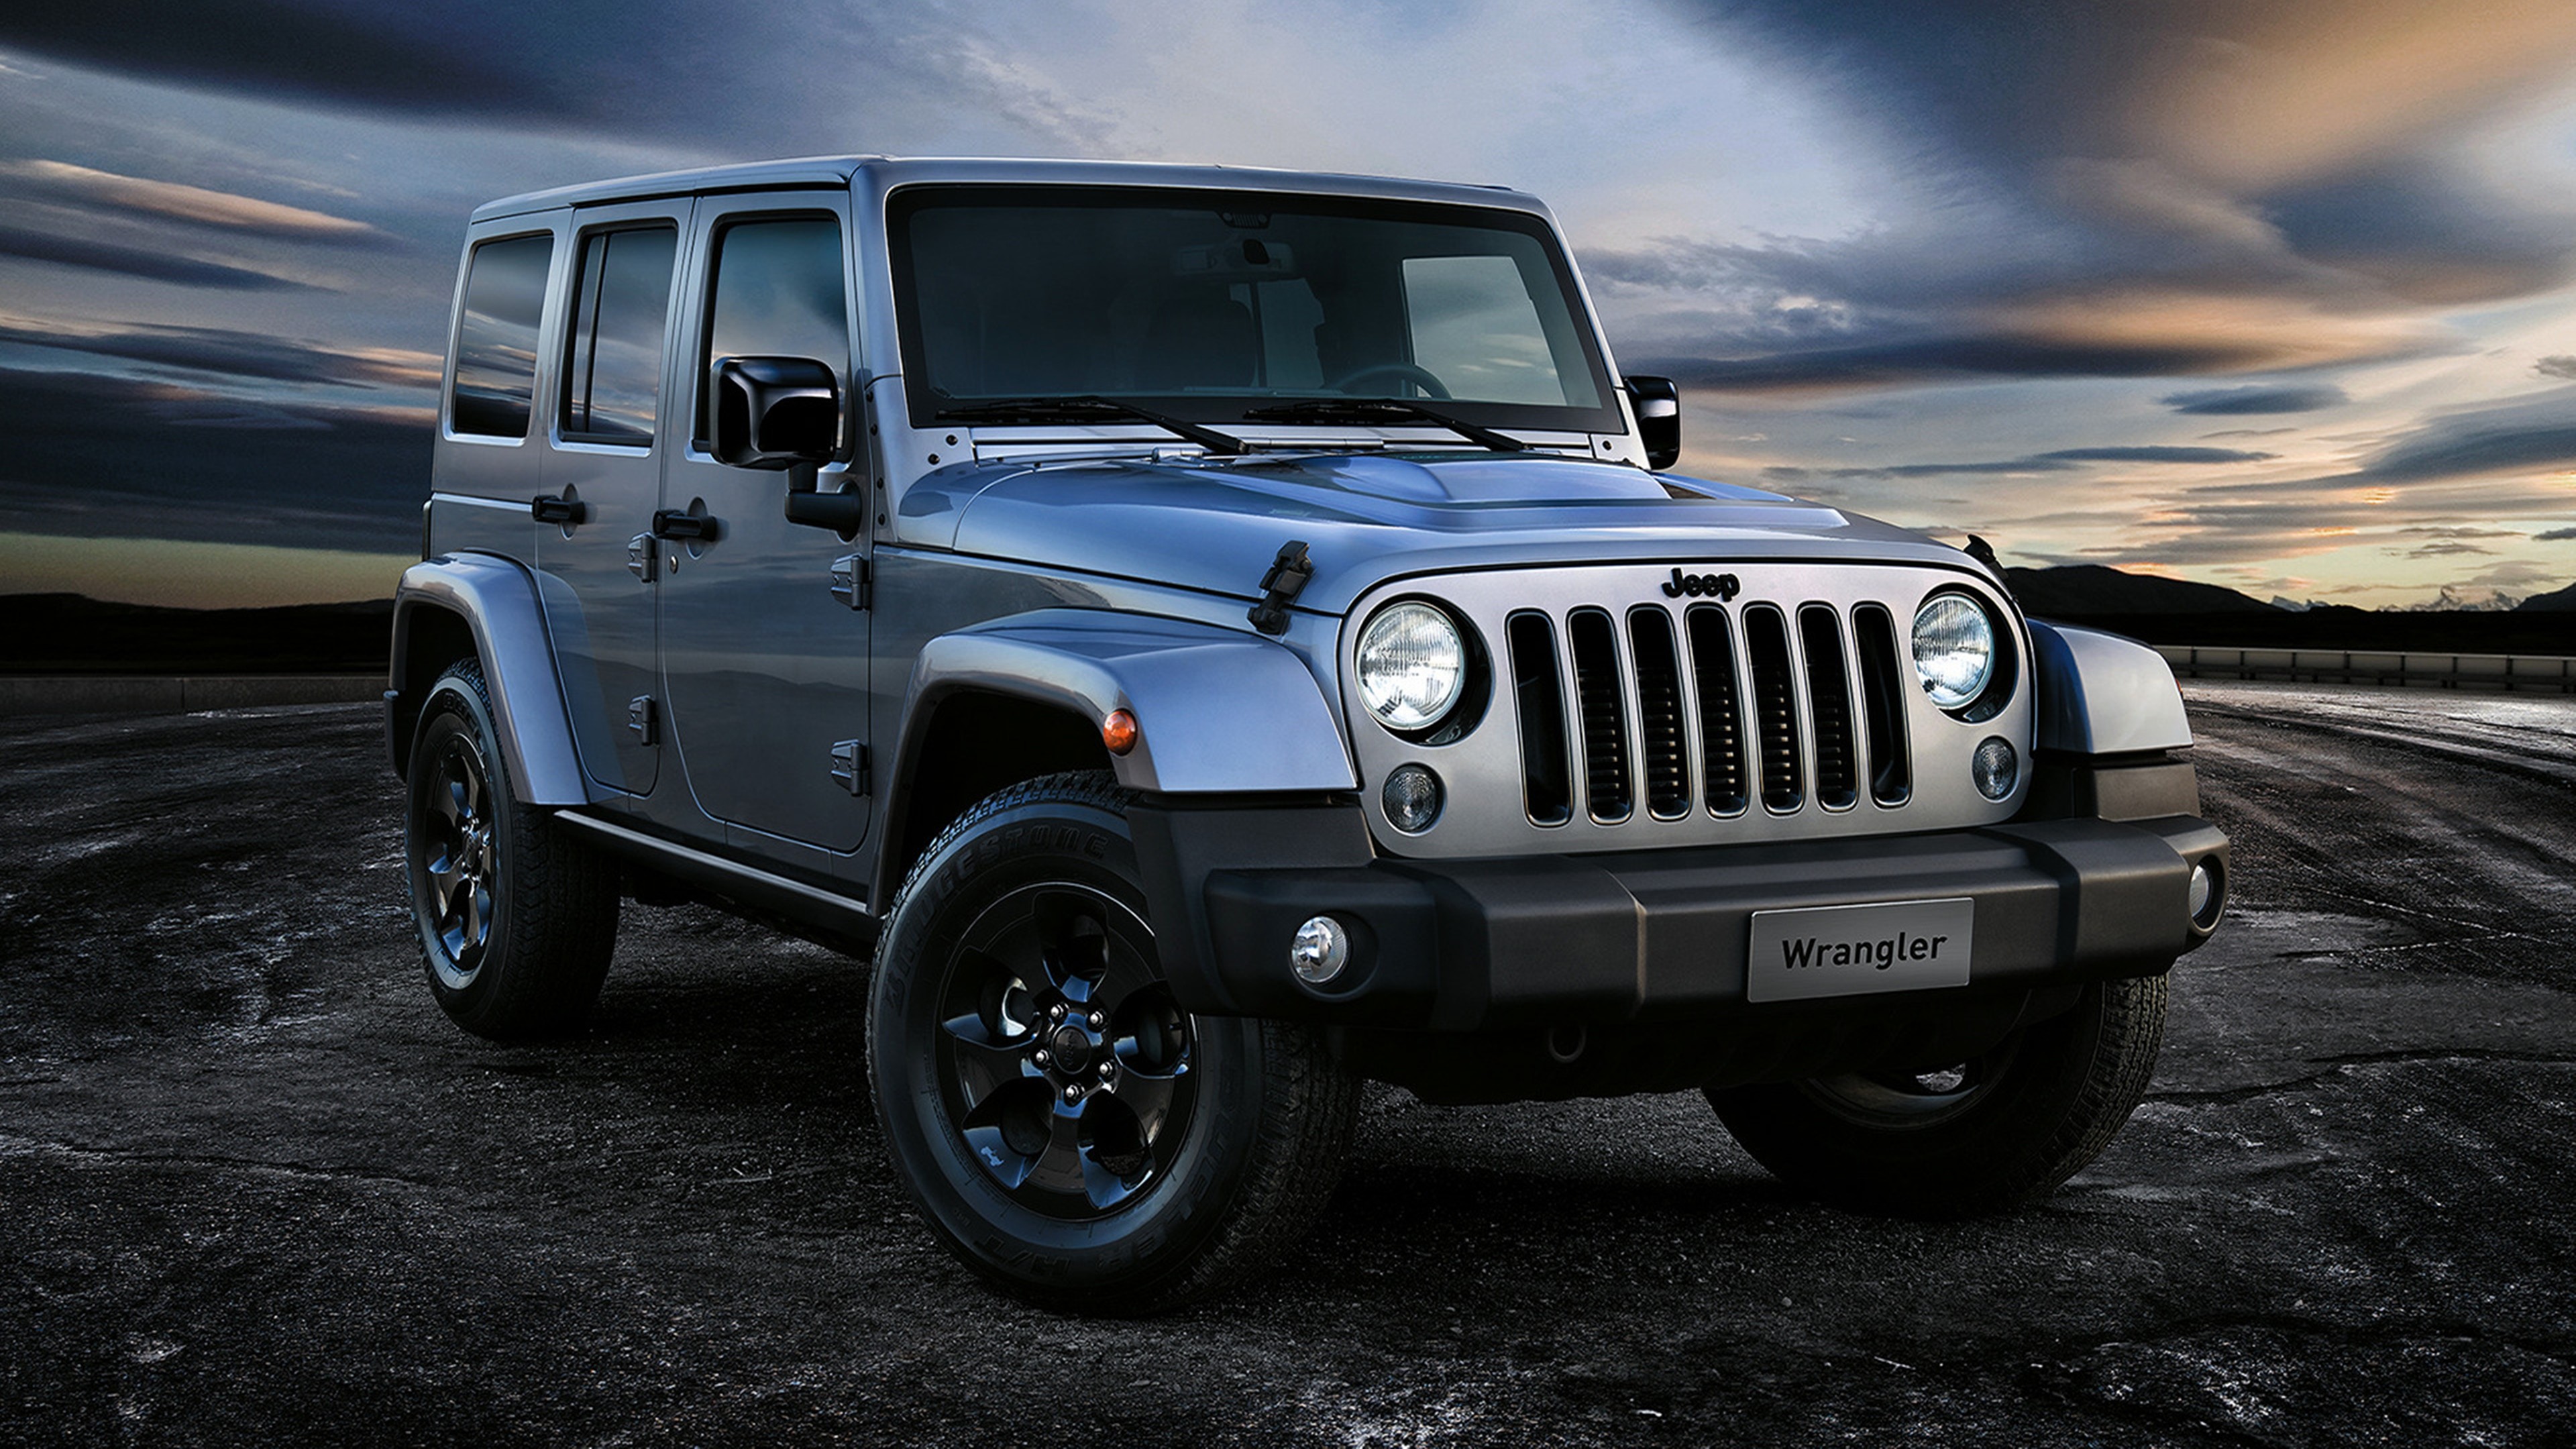 HD Wallpaper Background ID599376. Vehicles Jeep Wrangler